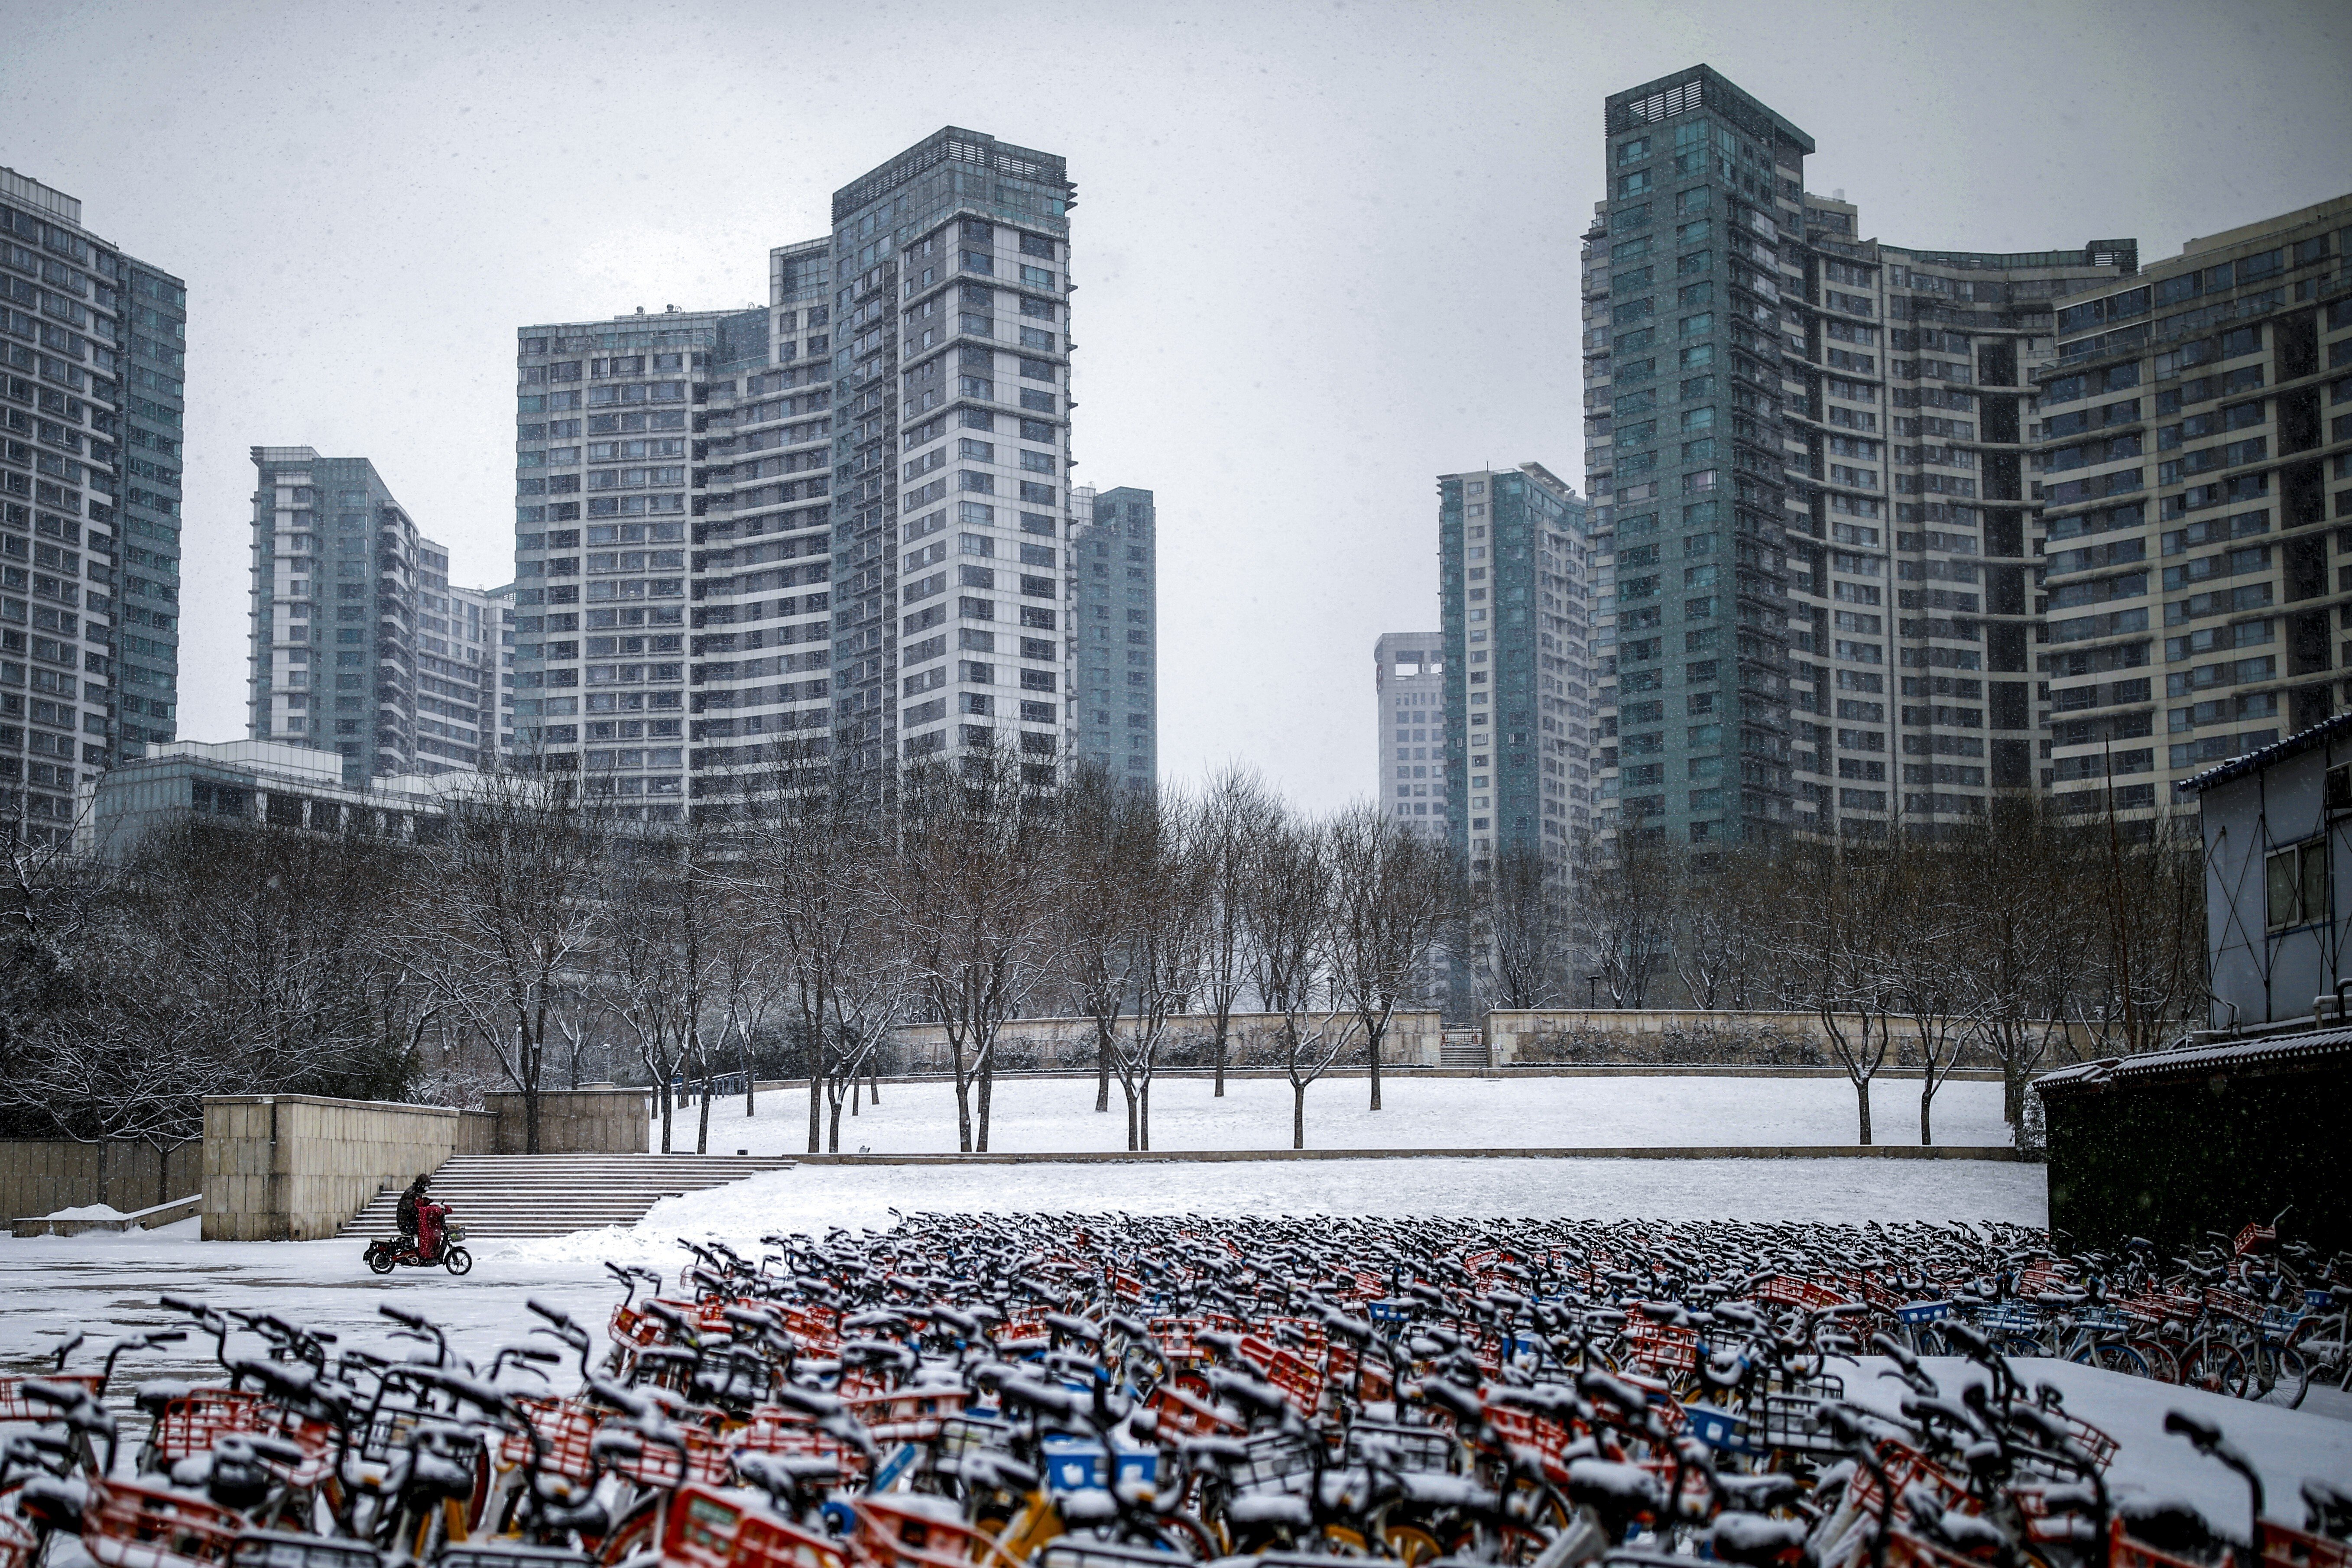 A person wearing a face mask rides an electric scooter with shared bikes parked nearby in Beijing on February 5. Picture: Reuters